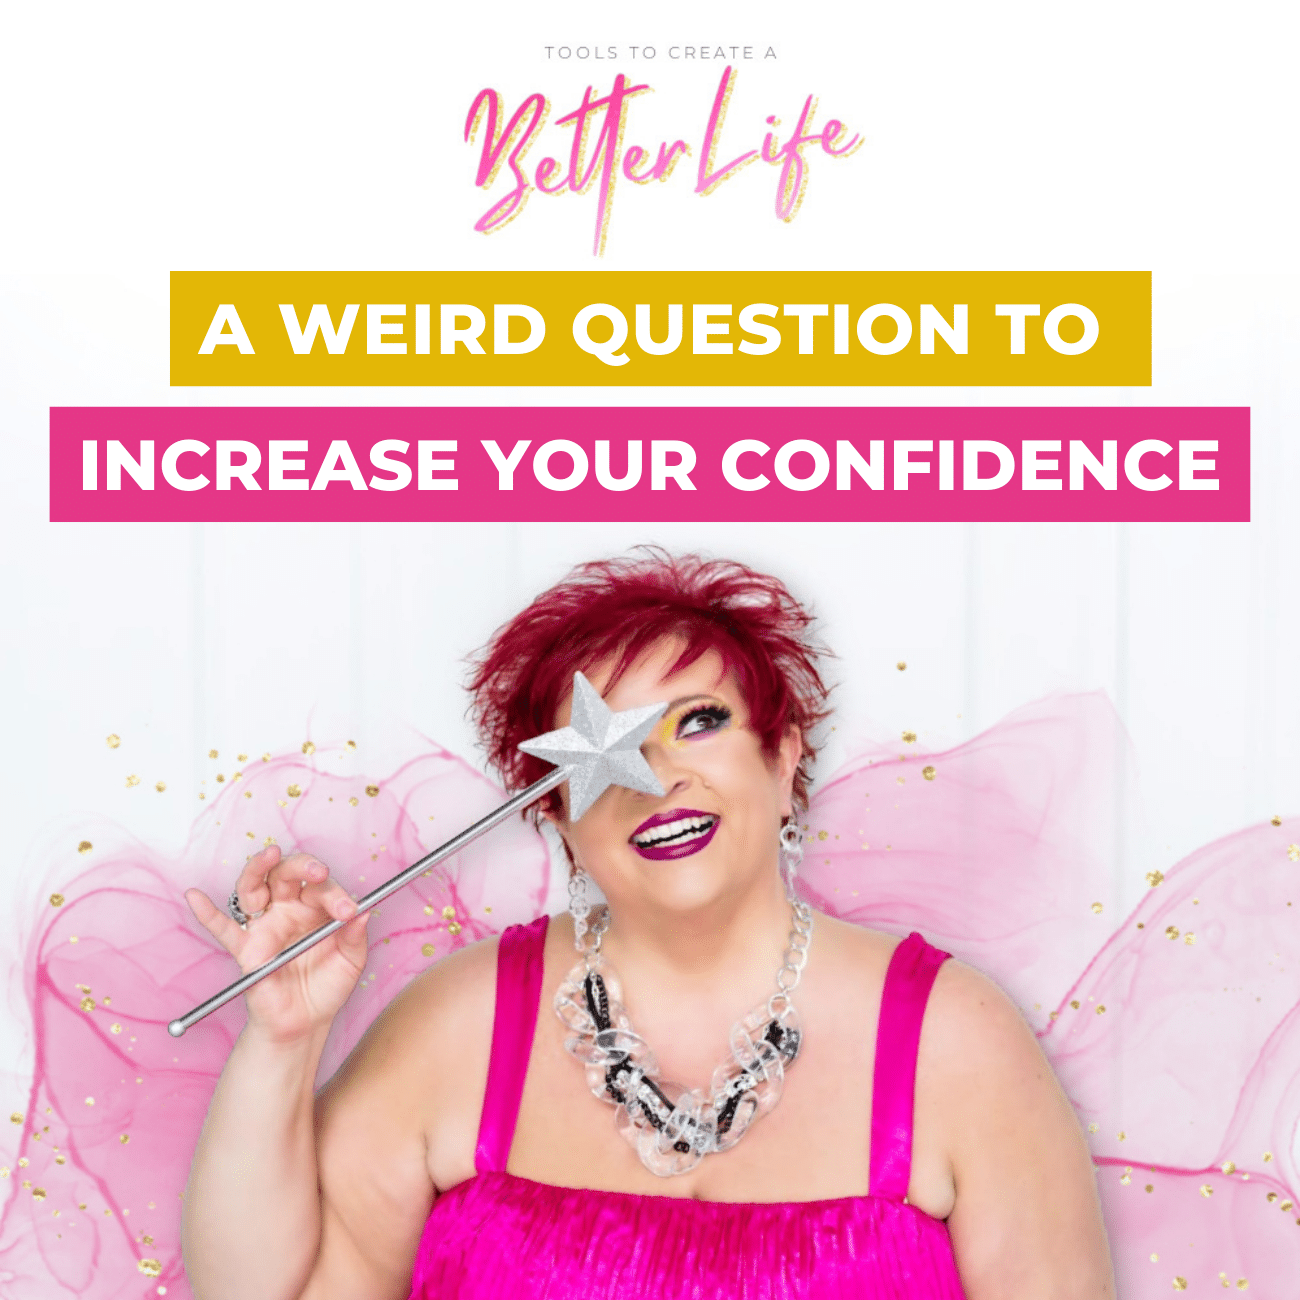 A Weird Question to Increase Your Confidence